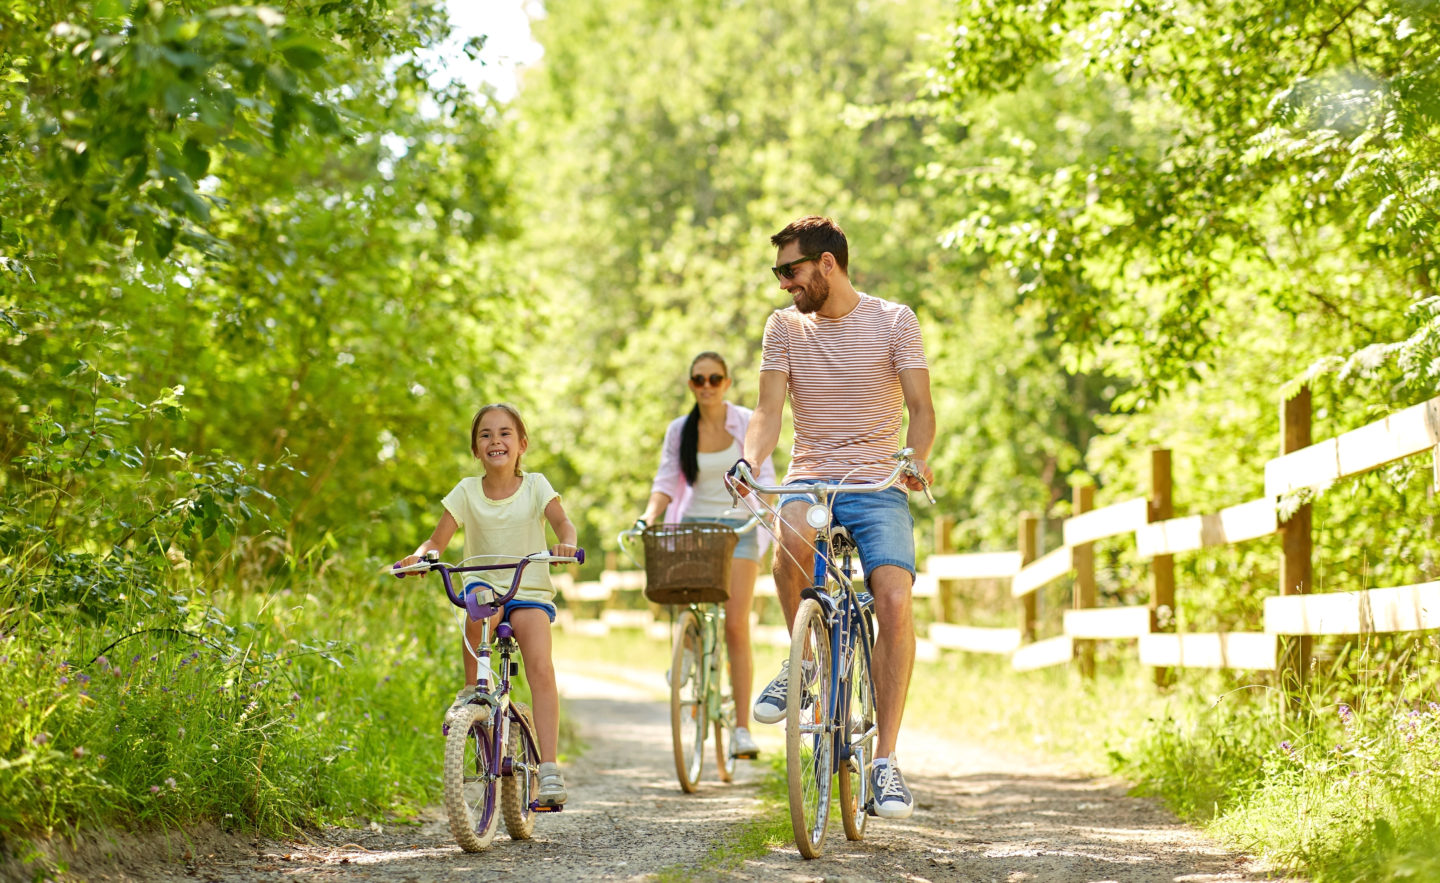 Best Outdoor Family Bonding Activities To Try This Summer: Go On A Bike Ride